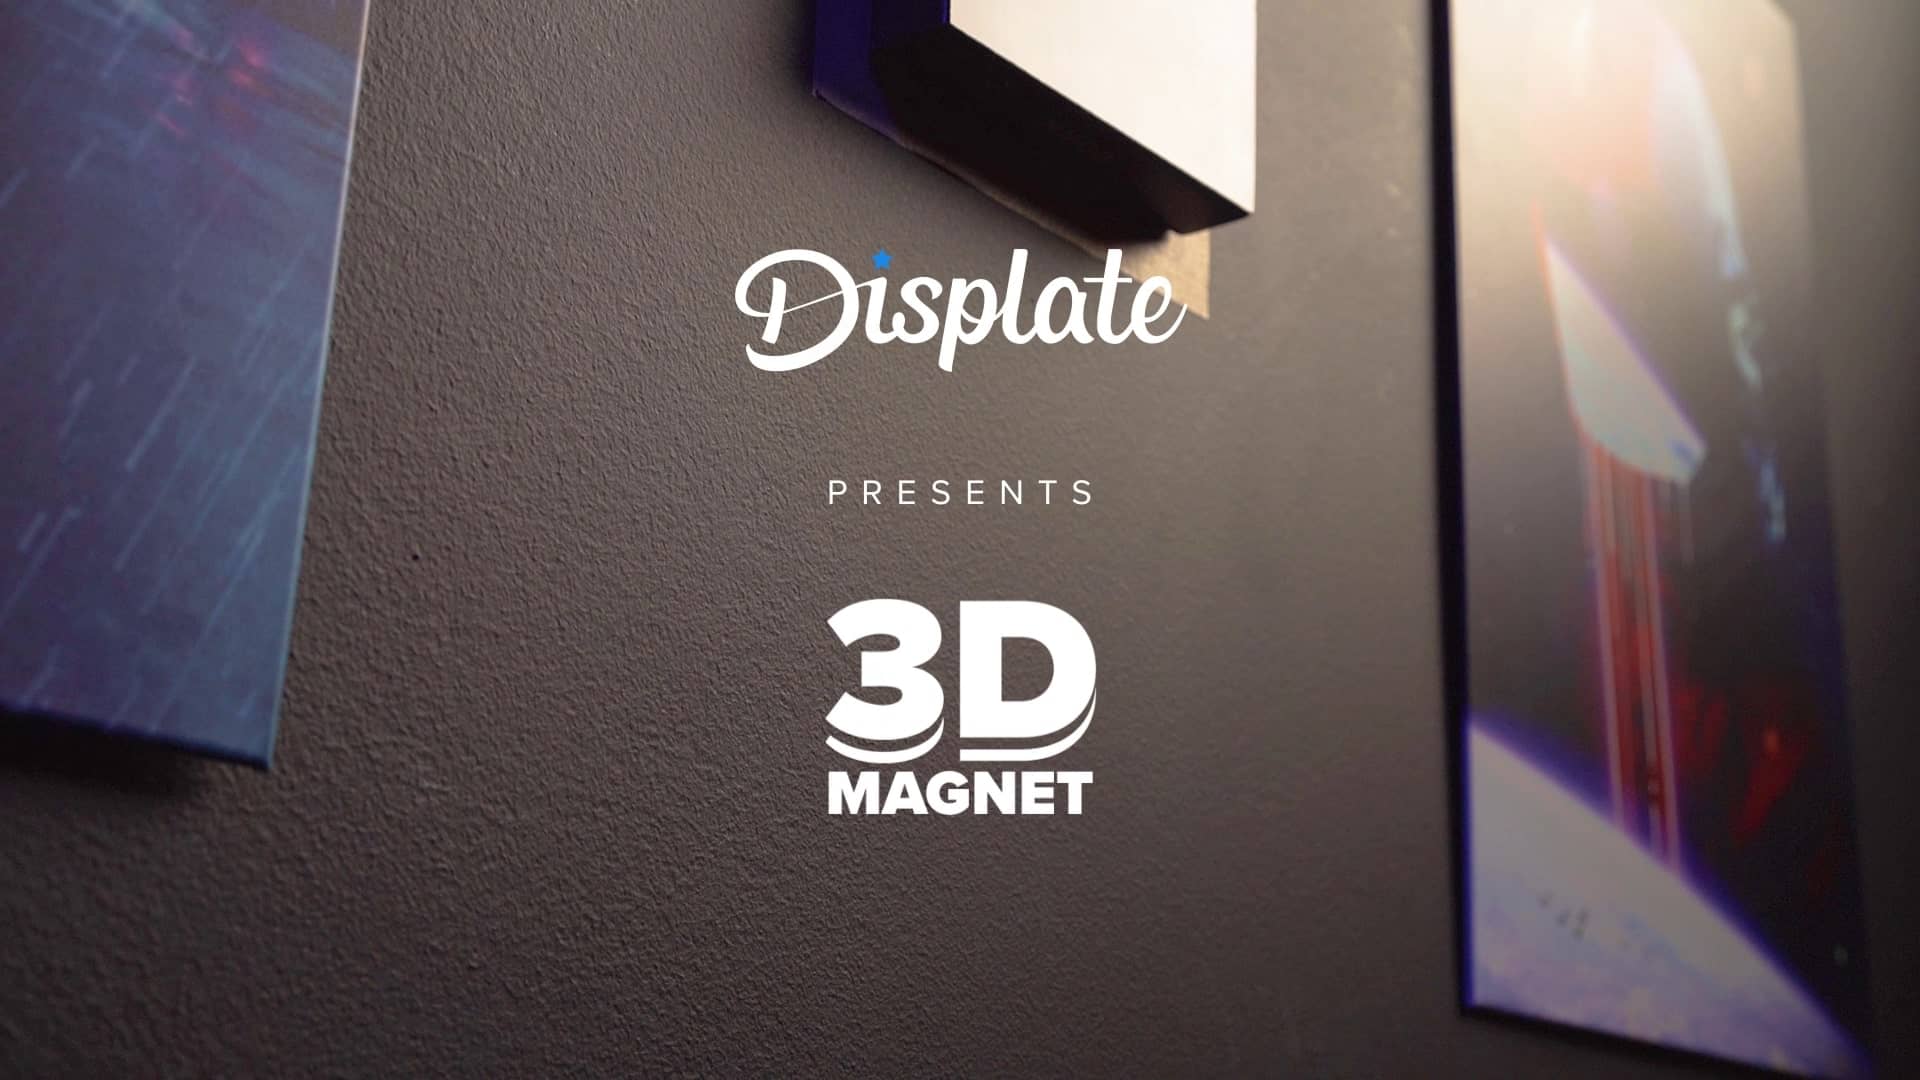 Displate — Safe Wall Magnet Mounting System assembly guide on Vimeo